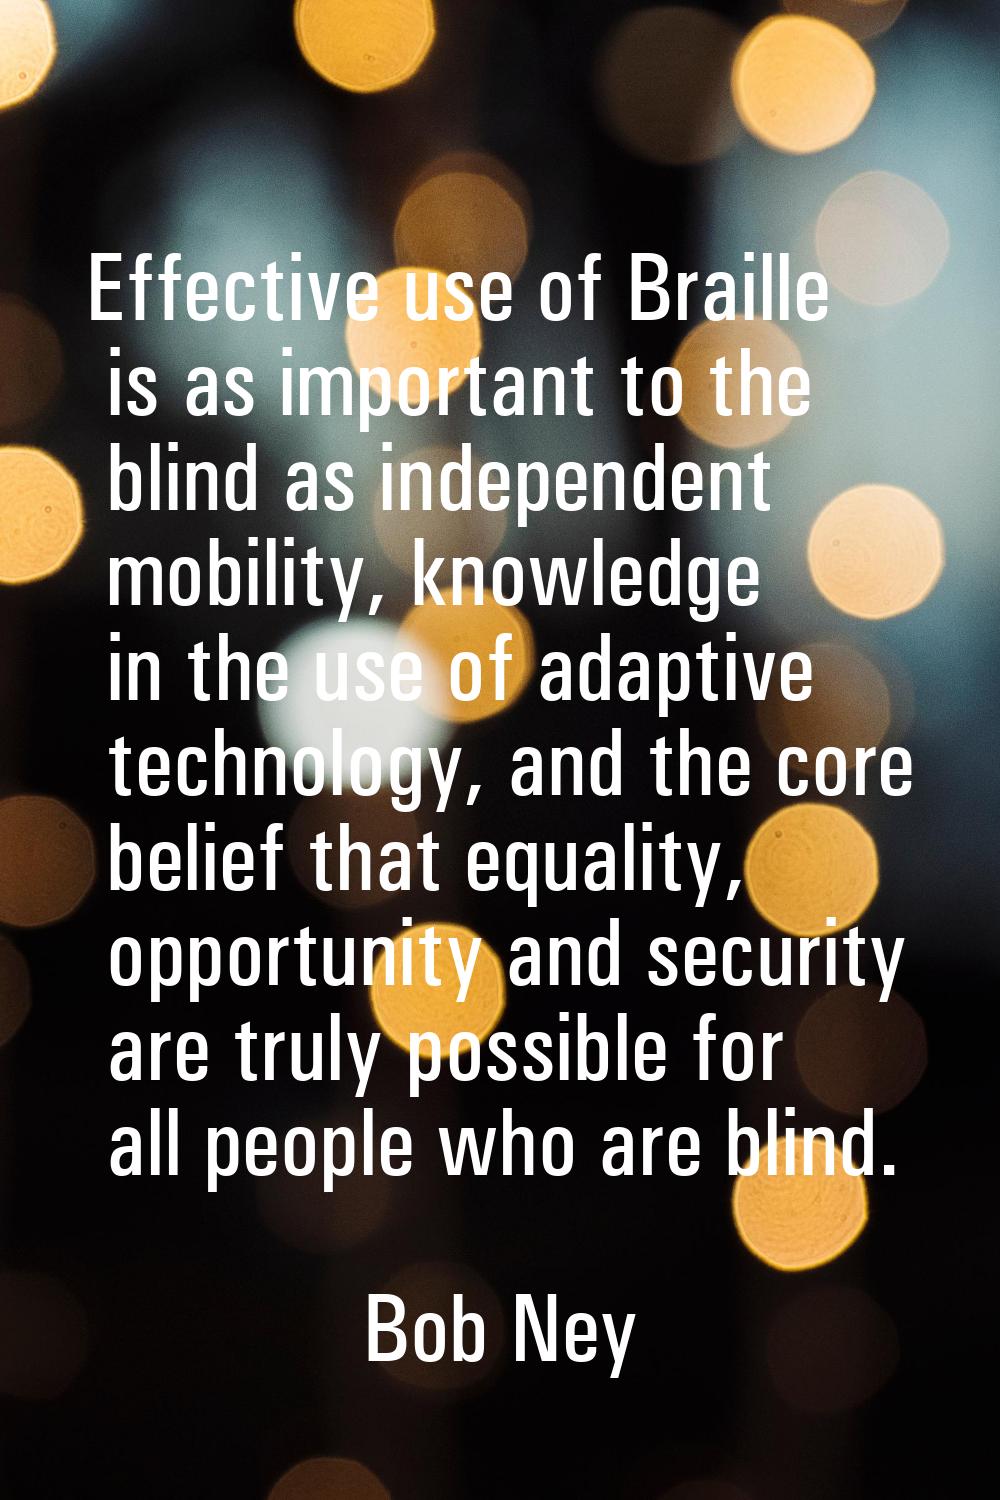 Effective use of Braille is as important to the blind as independent mobility, knowledge in the use